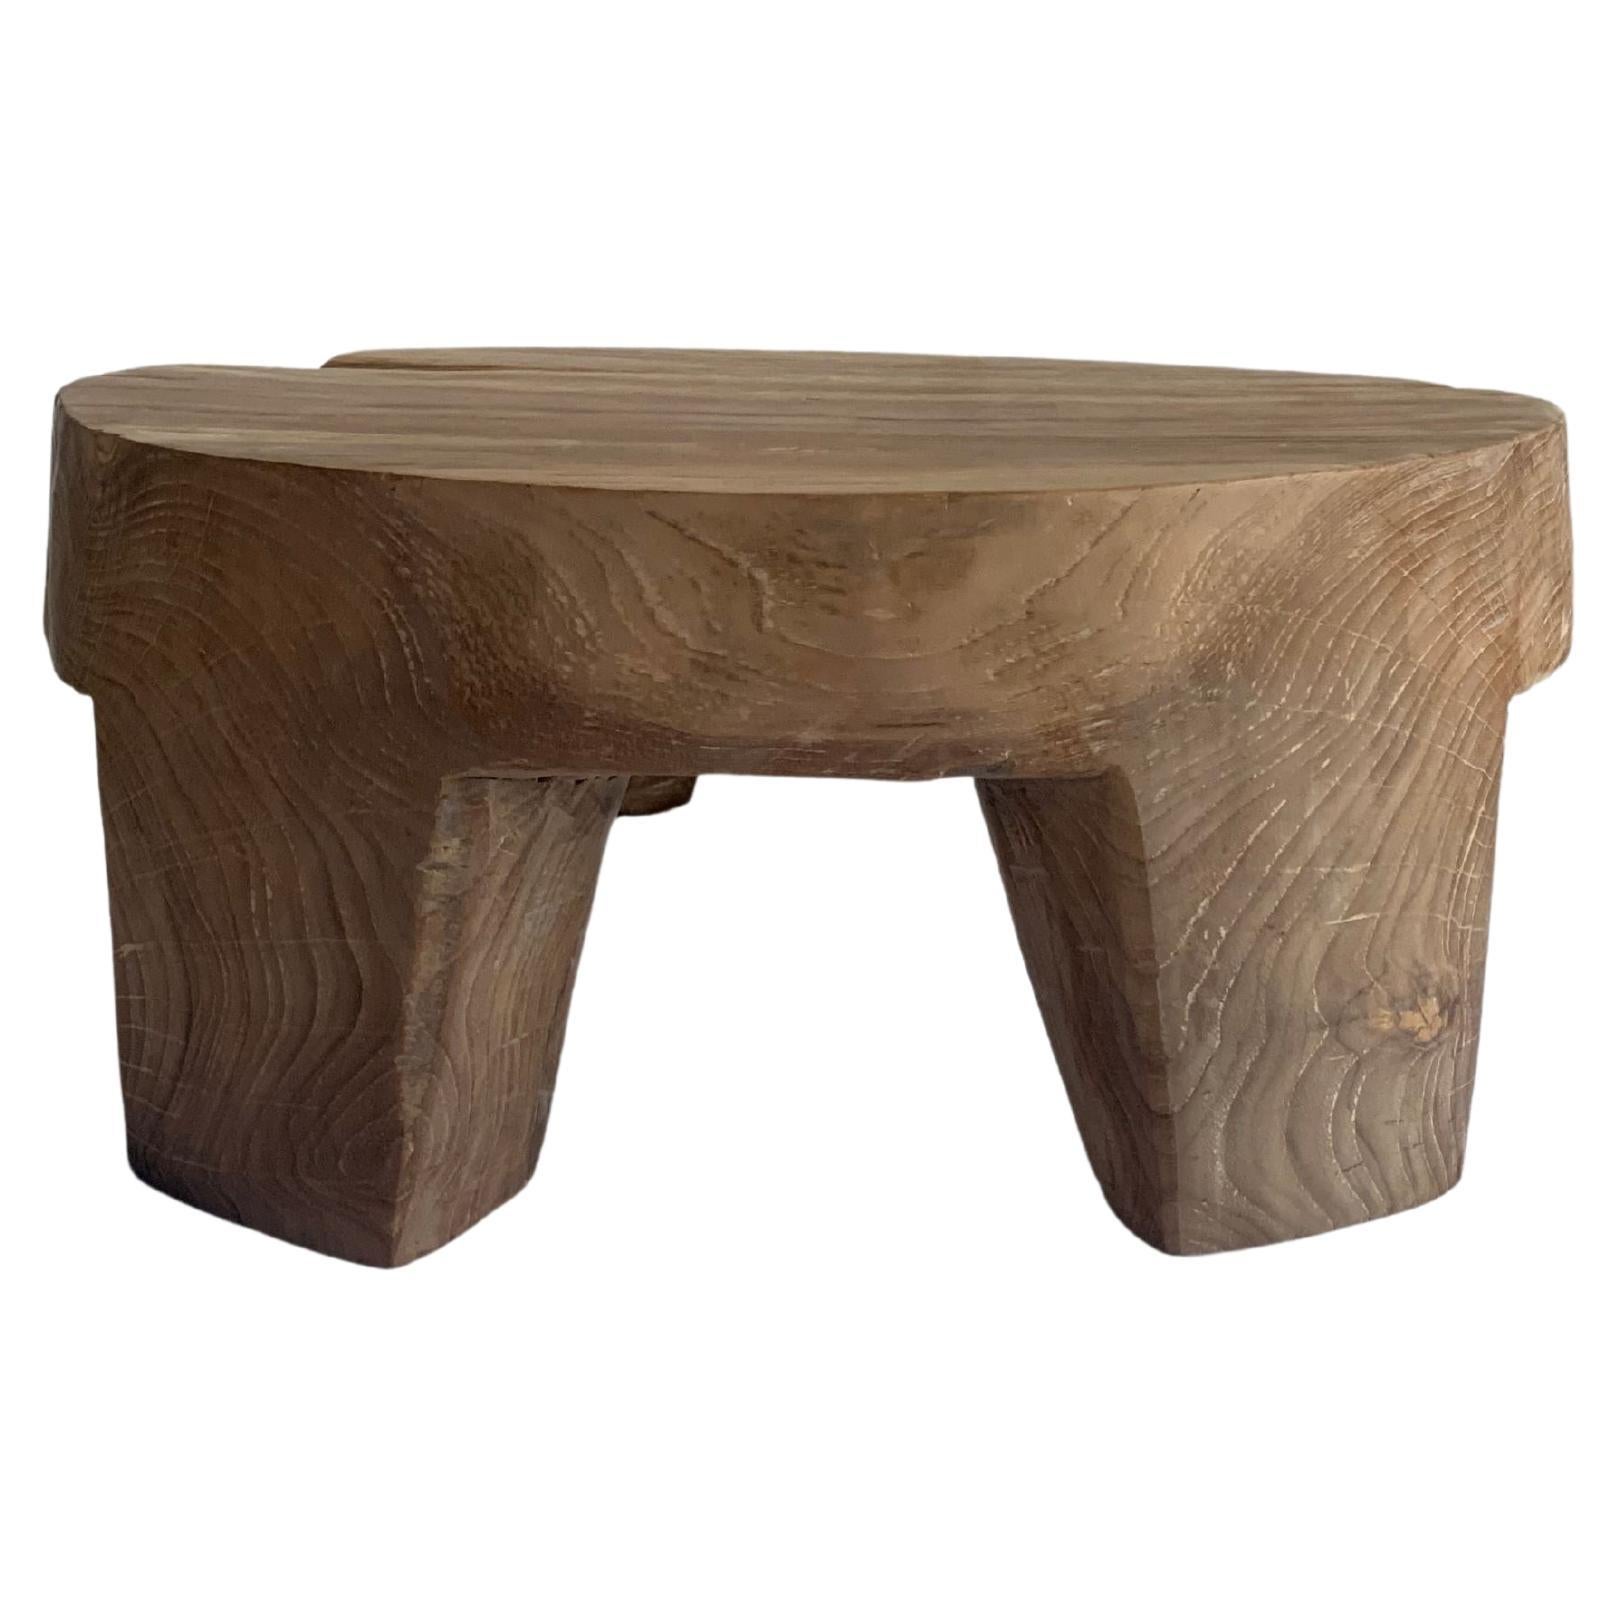 Sculptural Side Table Crafted from Solid Teak Wood For Sale at 1stDibs